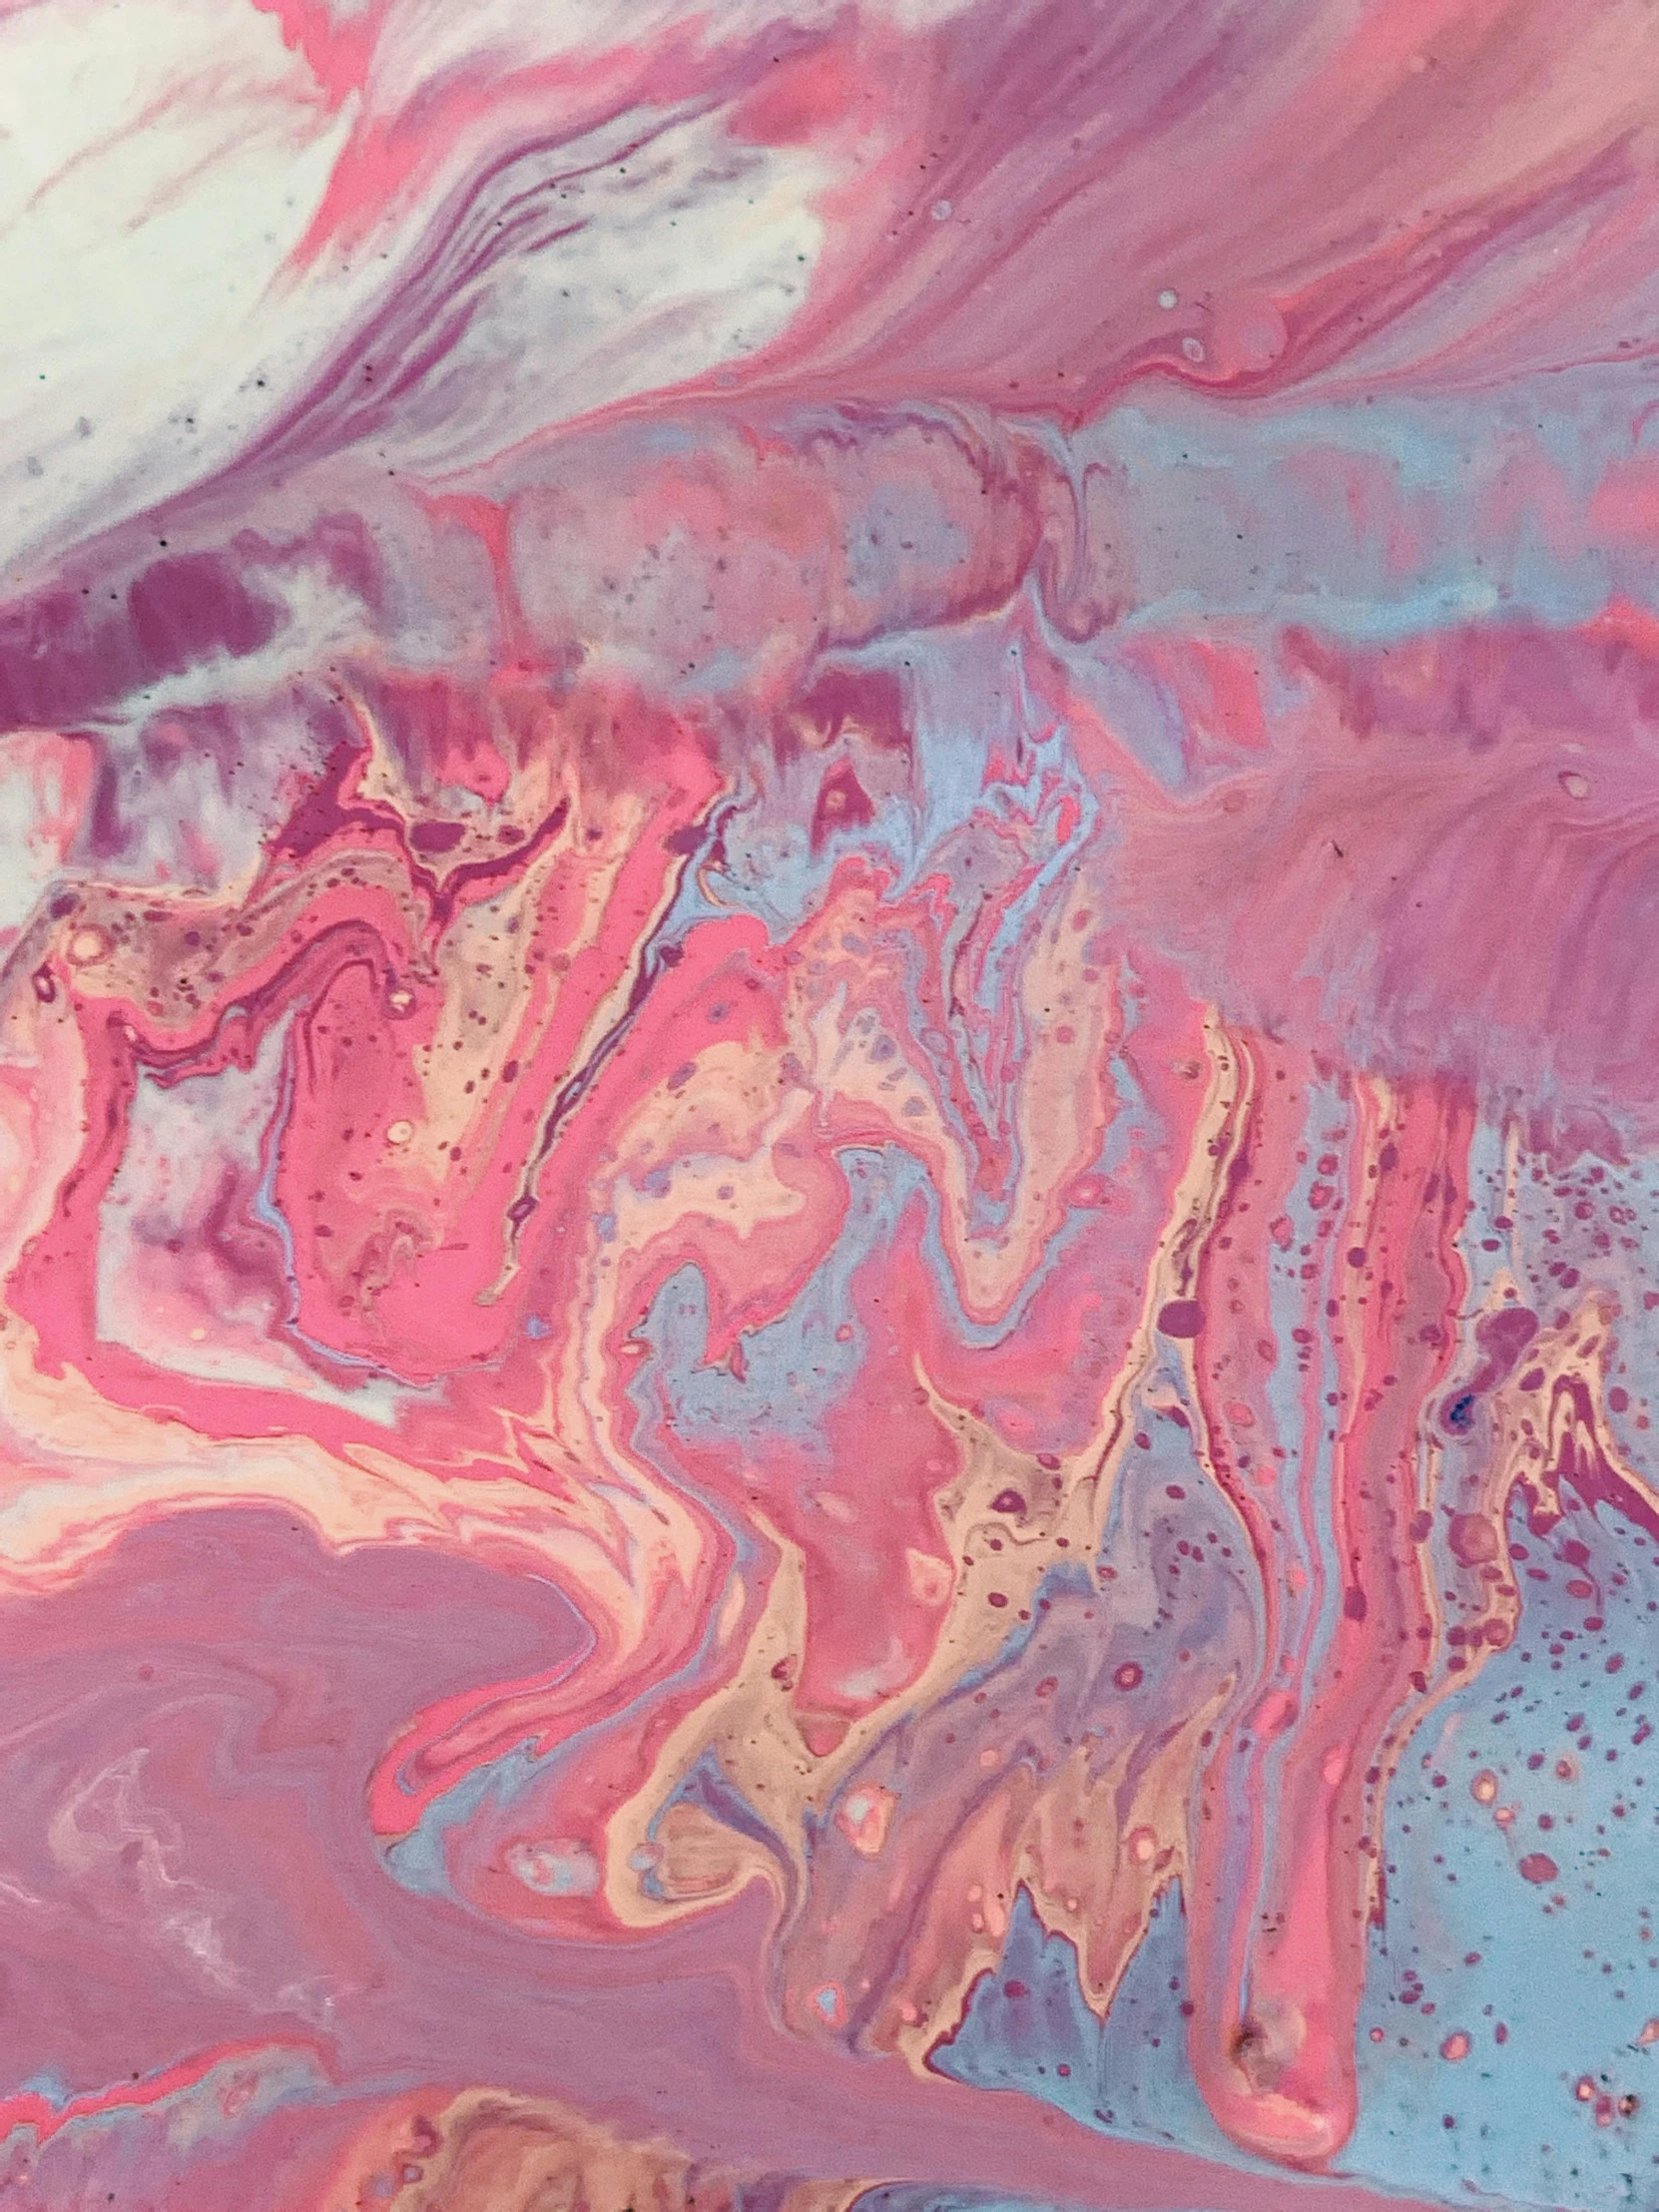 a close up of a painting on a piece of paper, inspired by Yanjun Cheng, trending on unsplash, metaphysical painting, pink slime everywhere, iridescent palette, flowing milk, album cover art